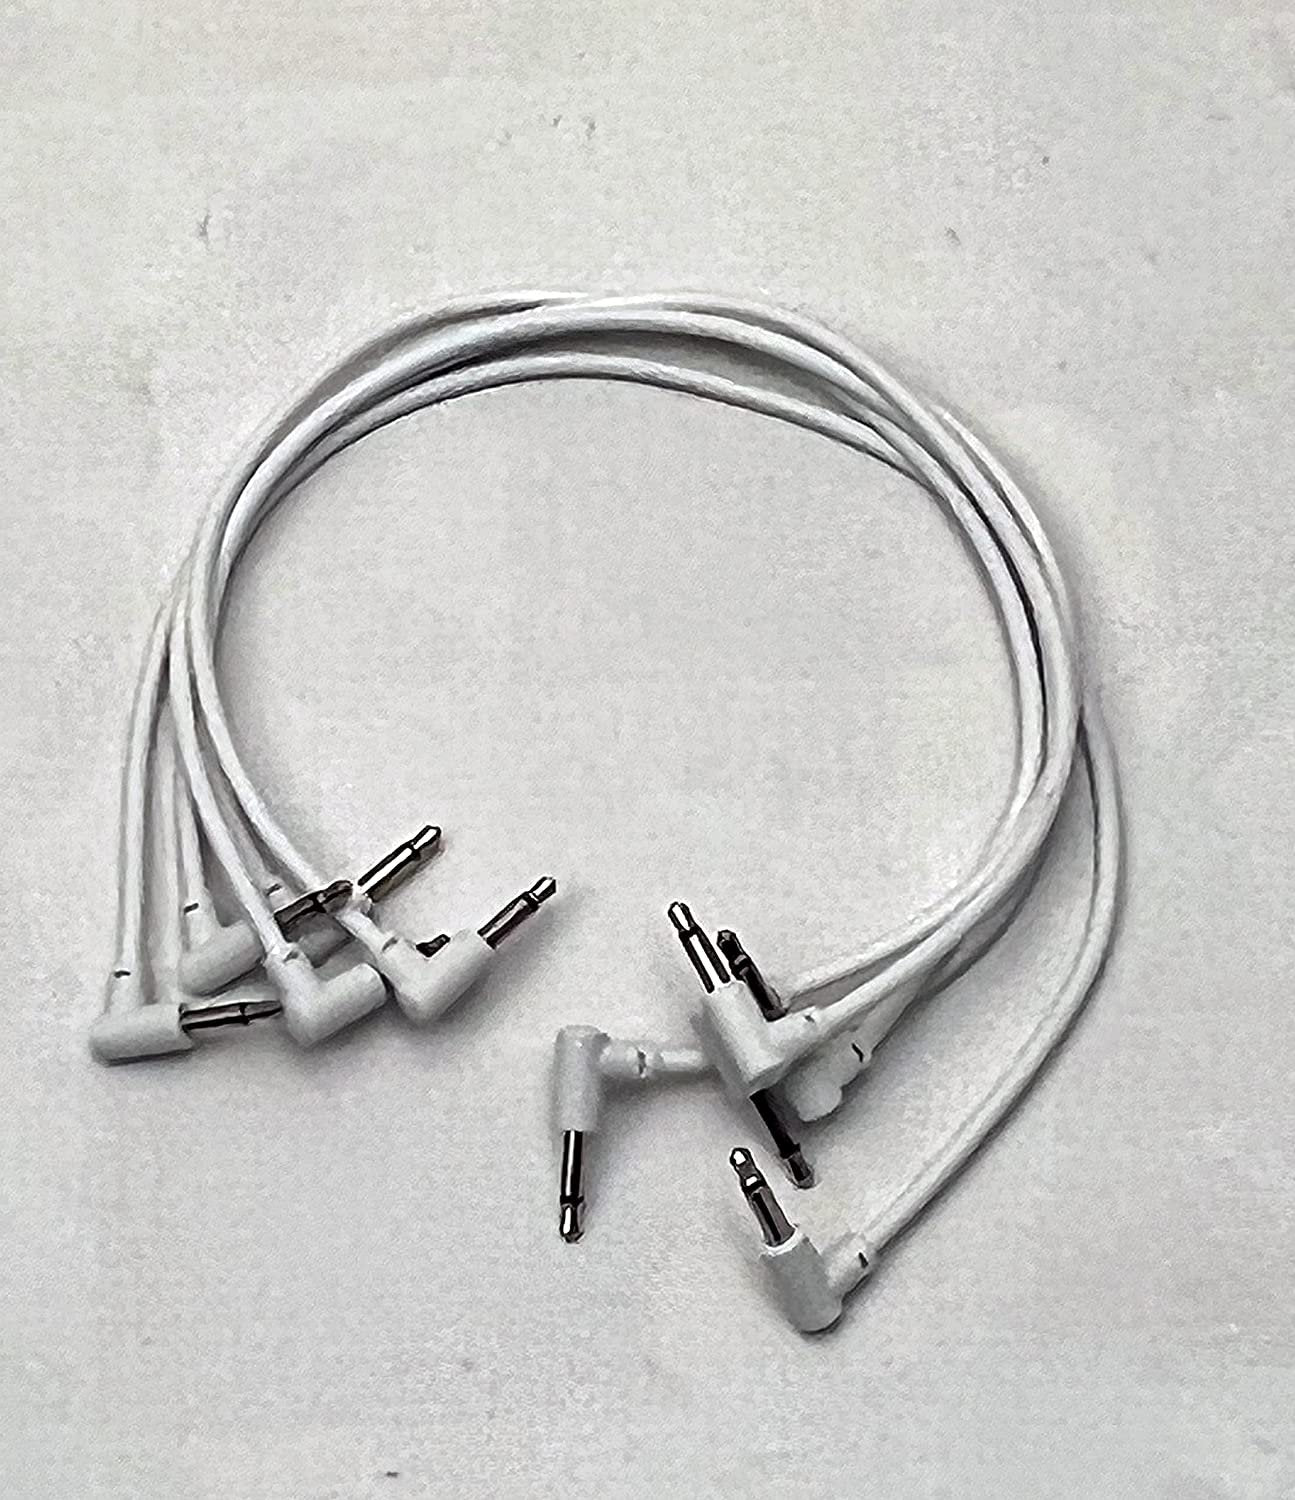 Luigis Modular M-PAR Right Angled Eurorack Patch Cables - Package of 5 White Cables, 12 (30 cm)